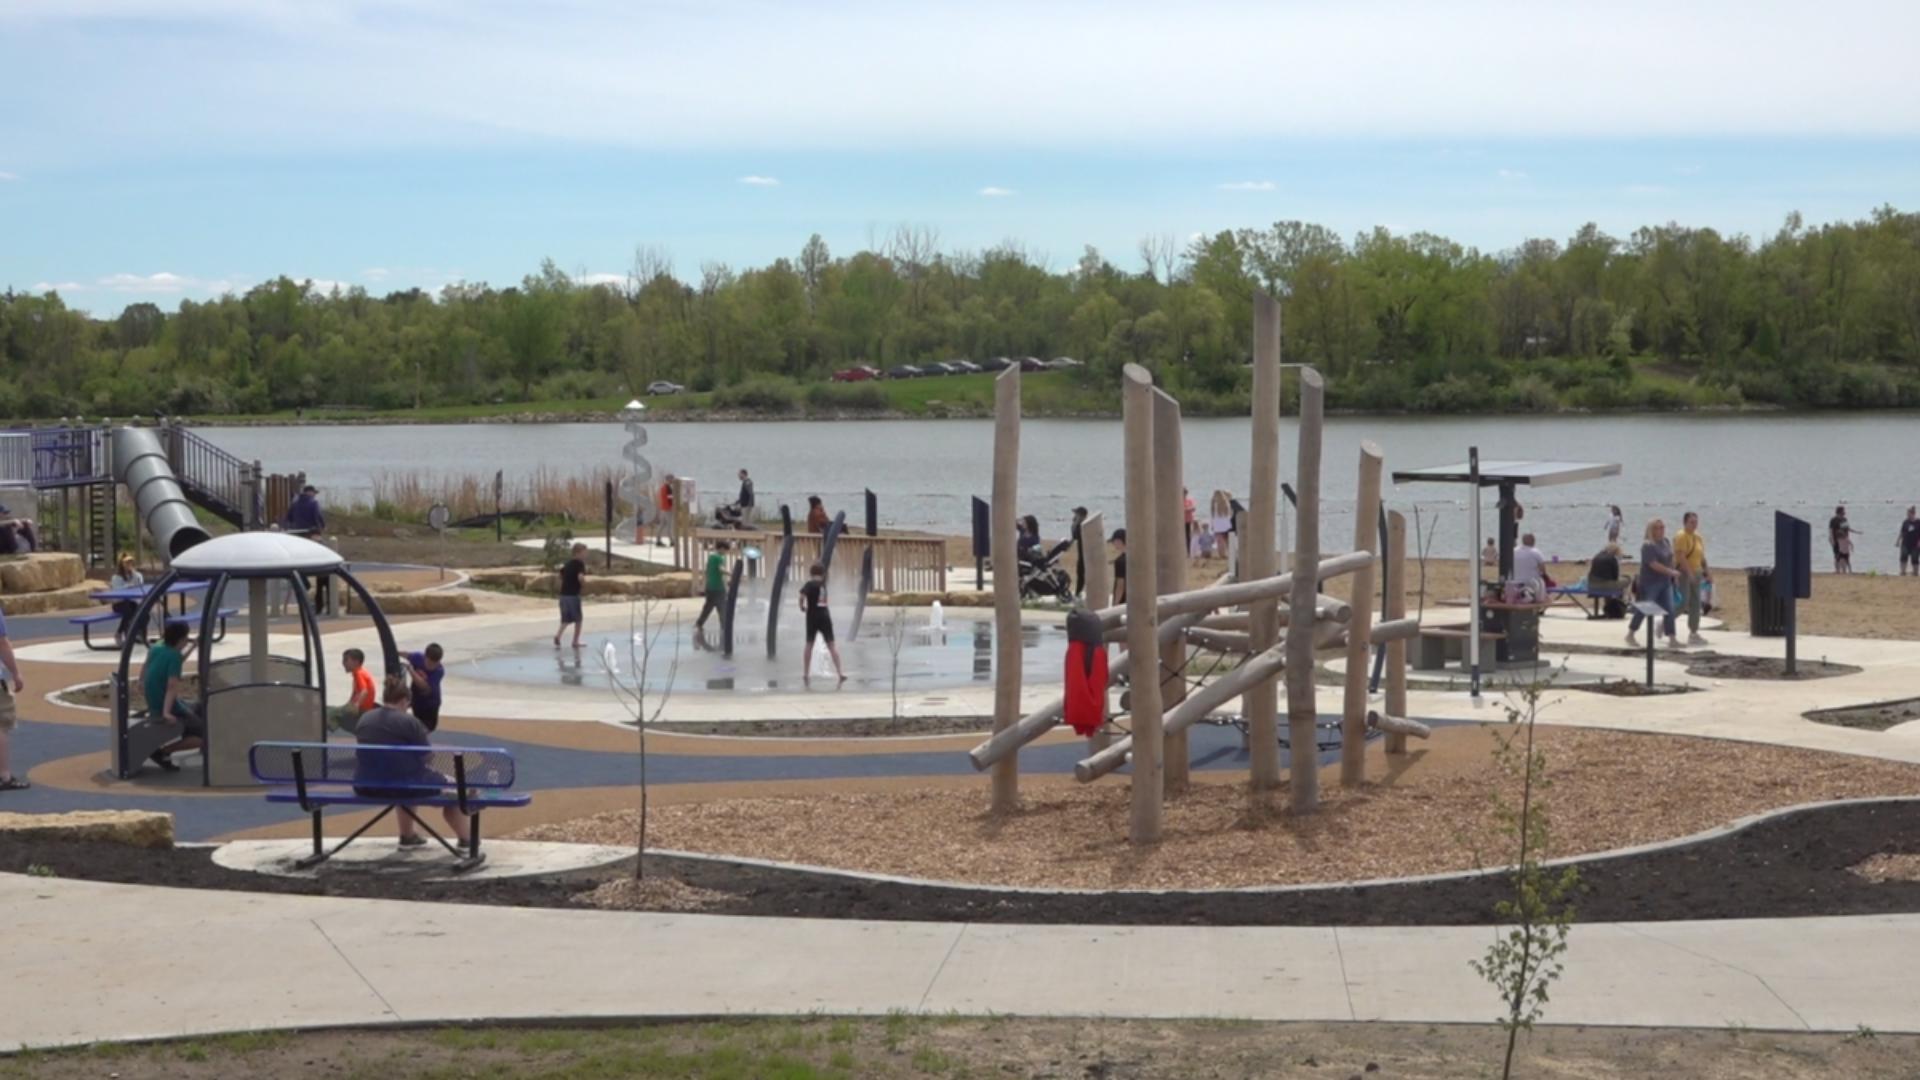 The Athene North Shore Recreation Area began renewal efforts in 2018, and one small idea turned into something much bigger for the community.